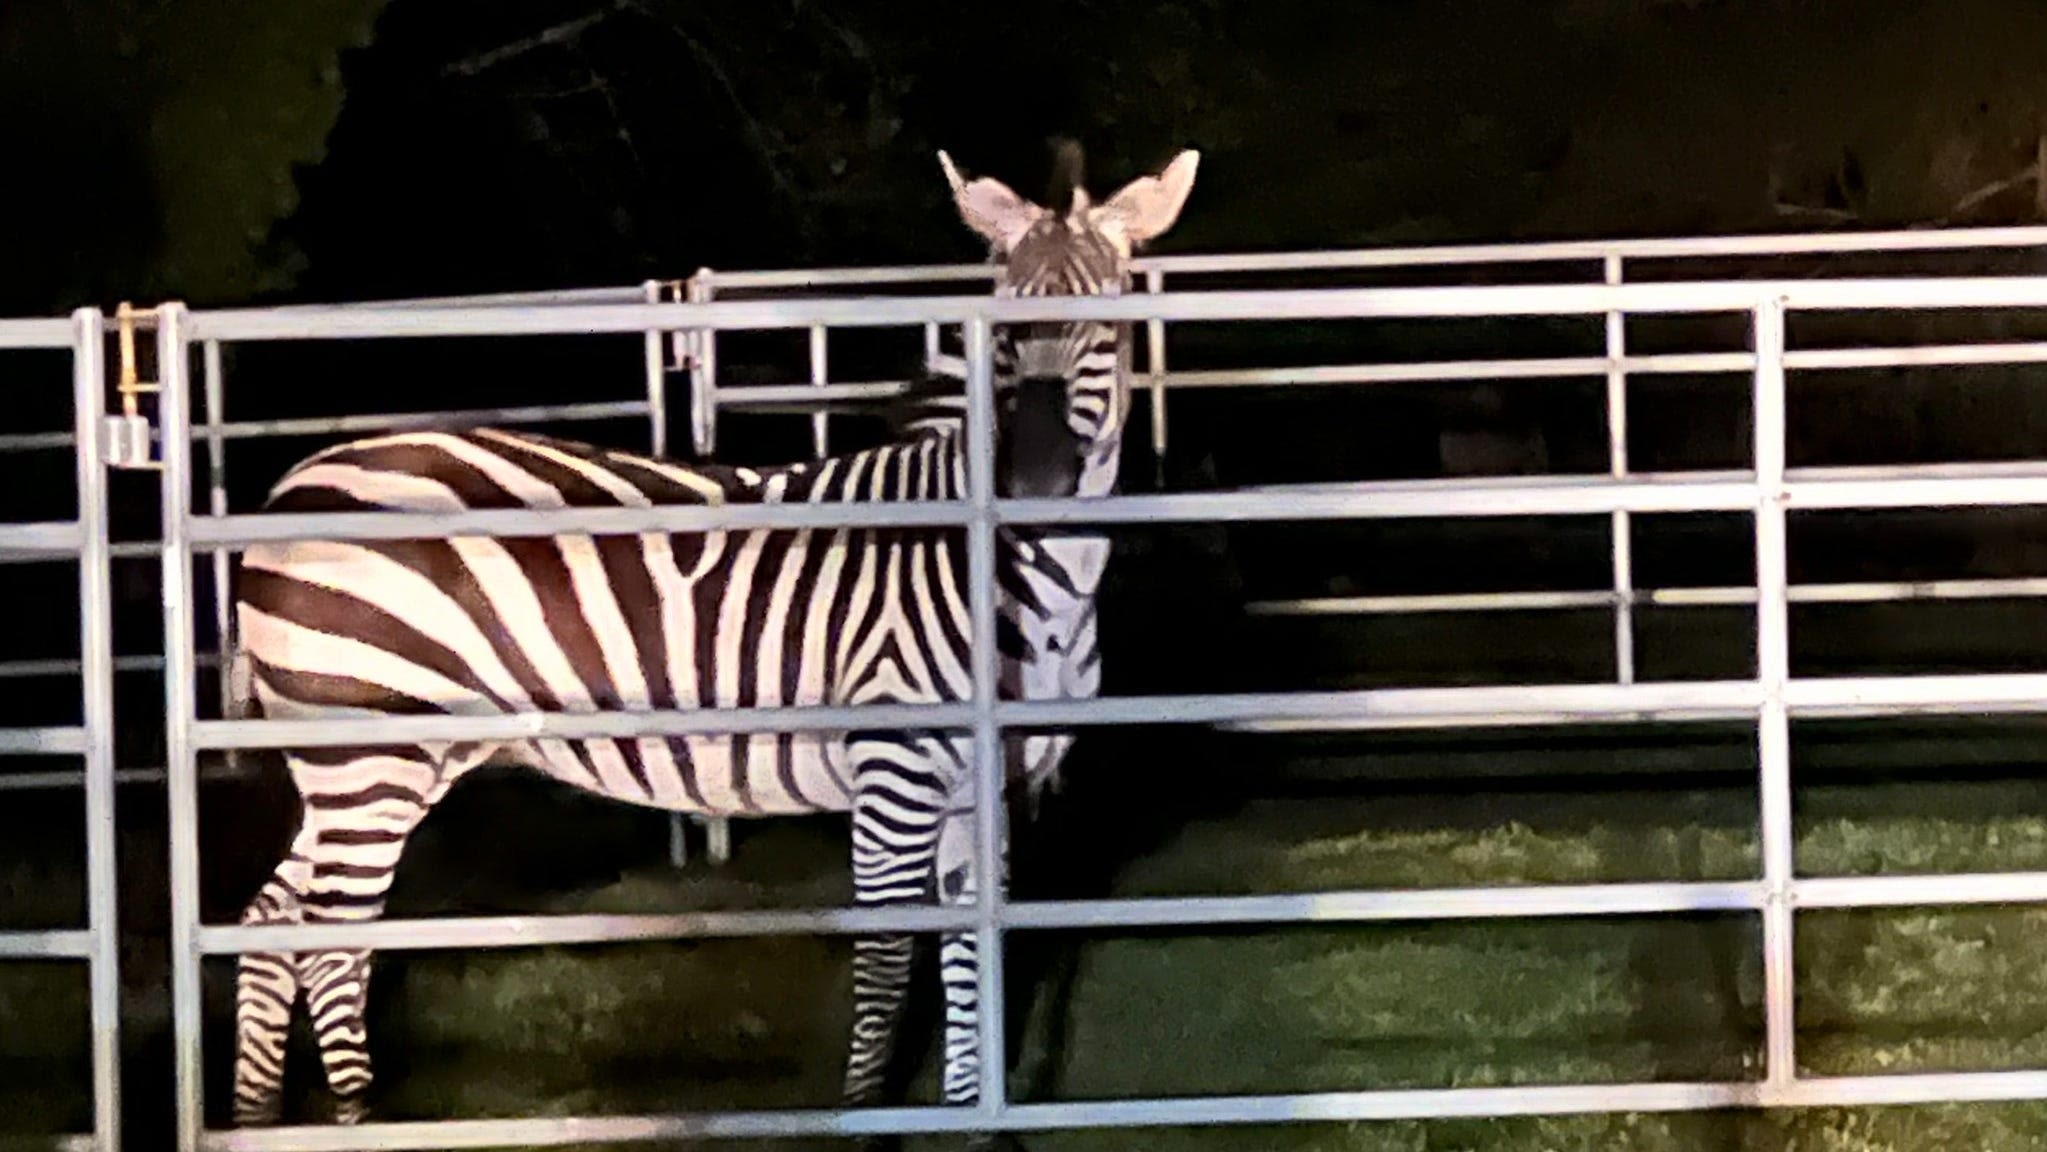 'It was quite a show': Escaped zebra caught in Washington yard after 6 days on the run